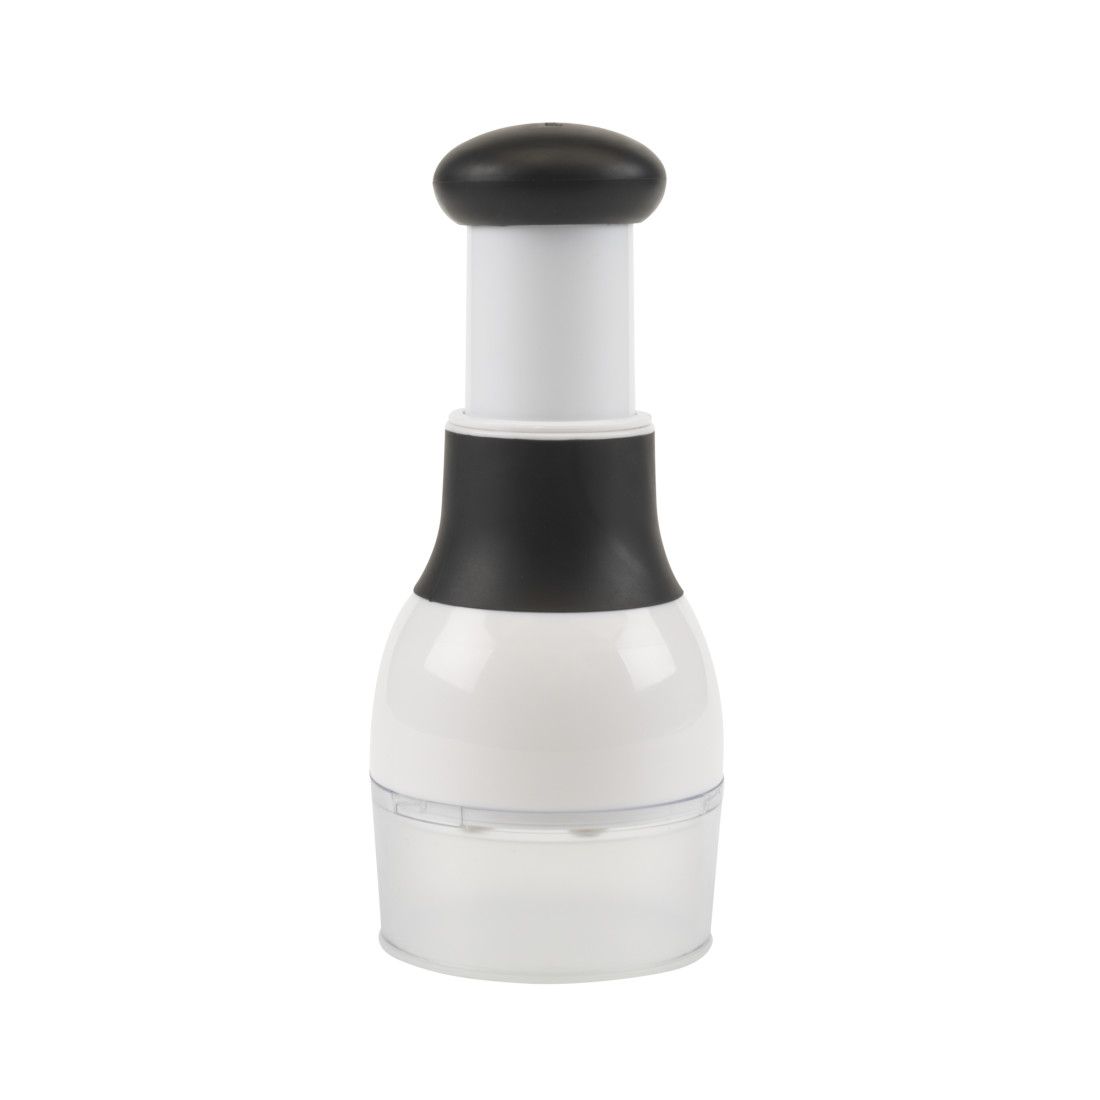 GOOD QUALITY OXO PLUNGER STYLE FOOD CHOPPER WITH